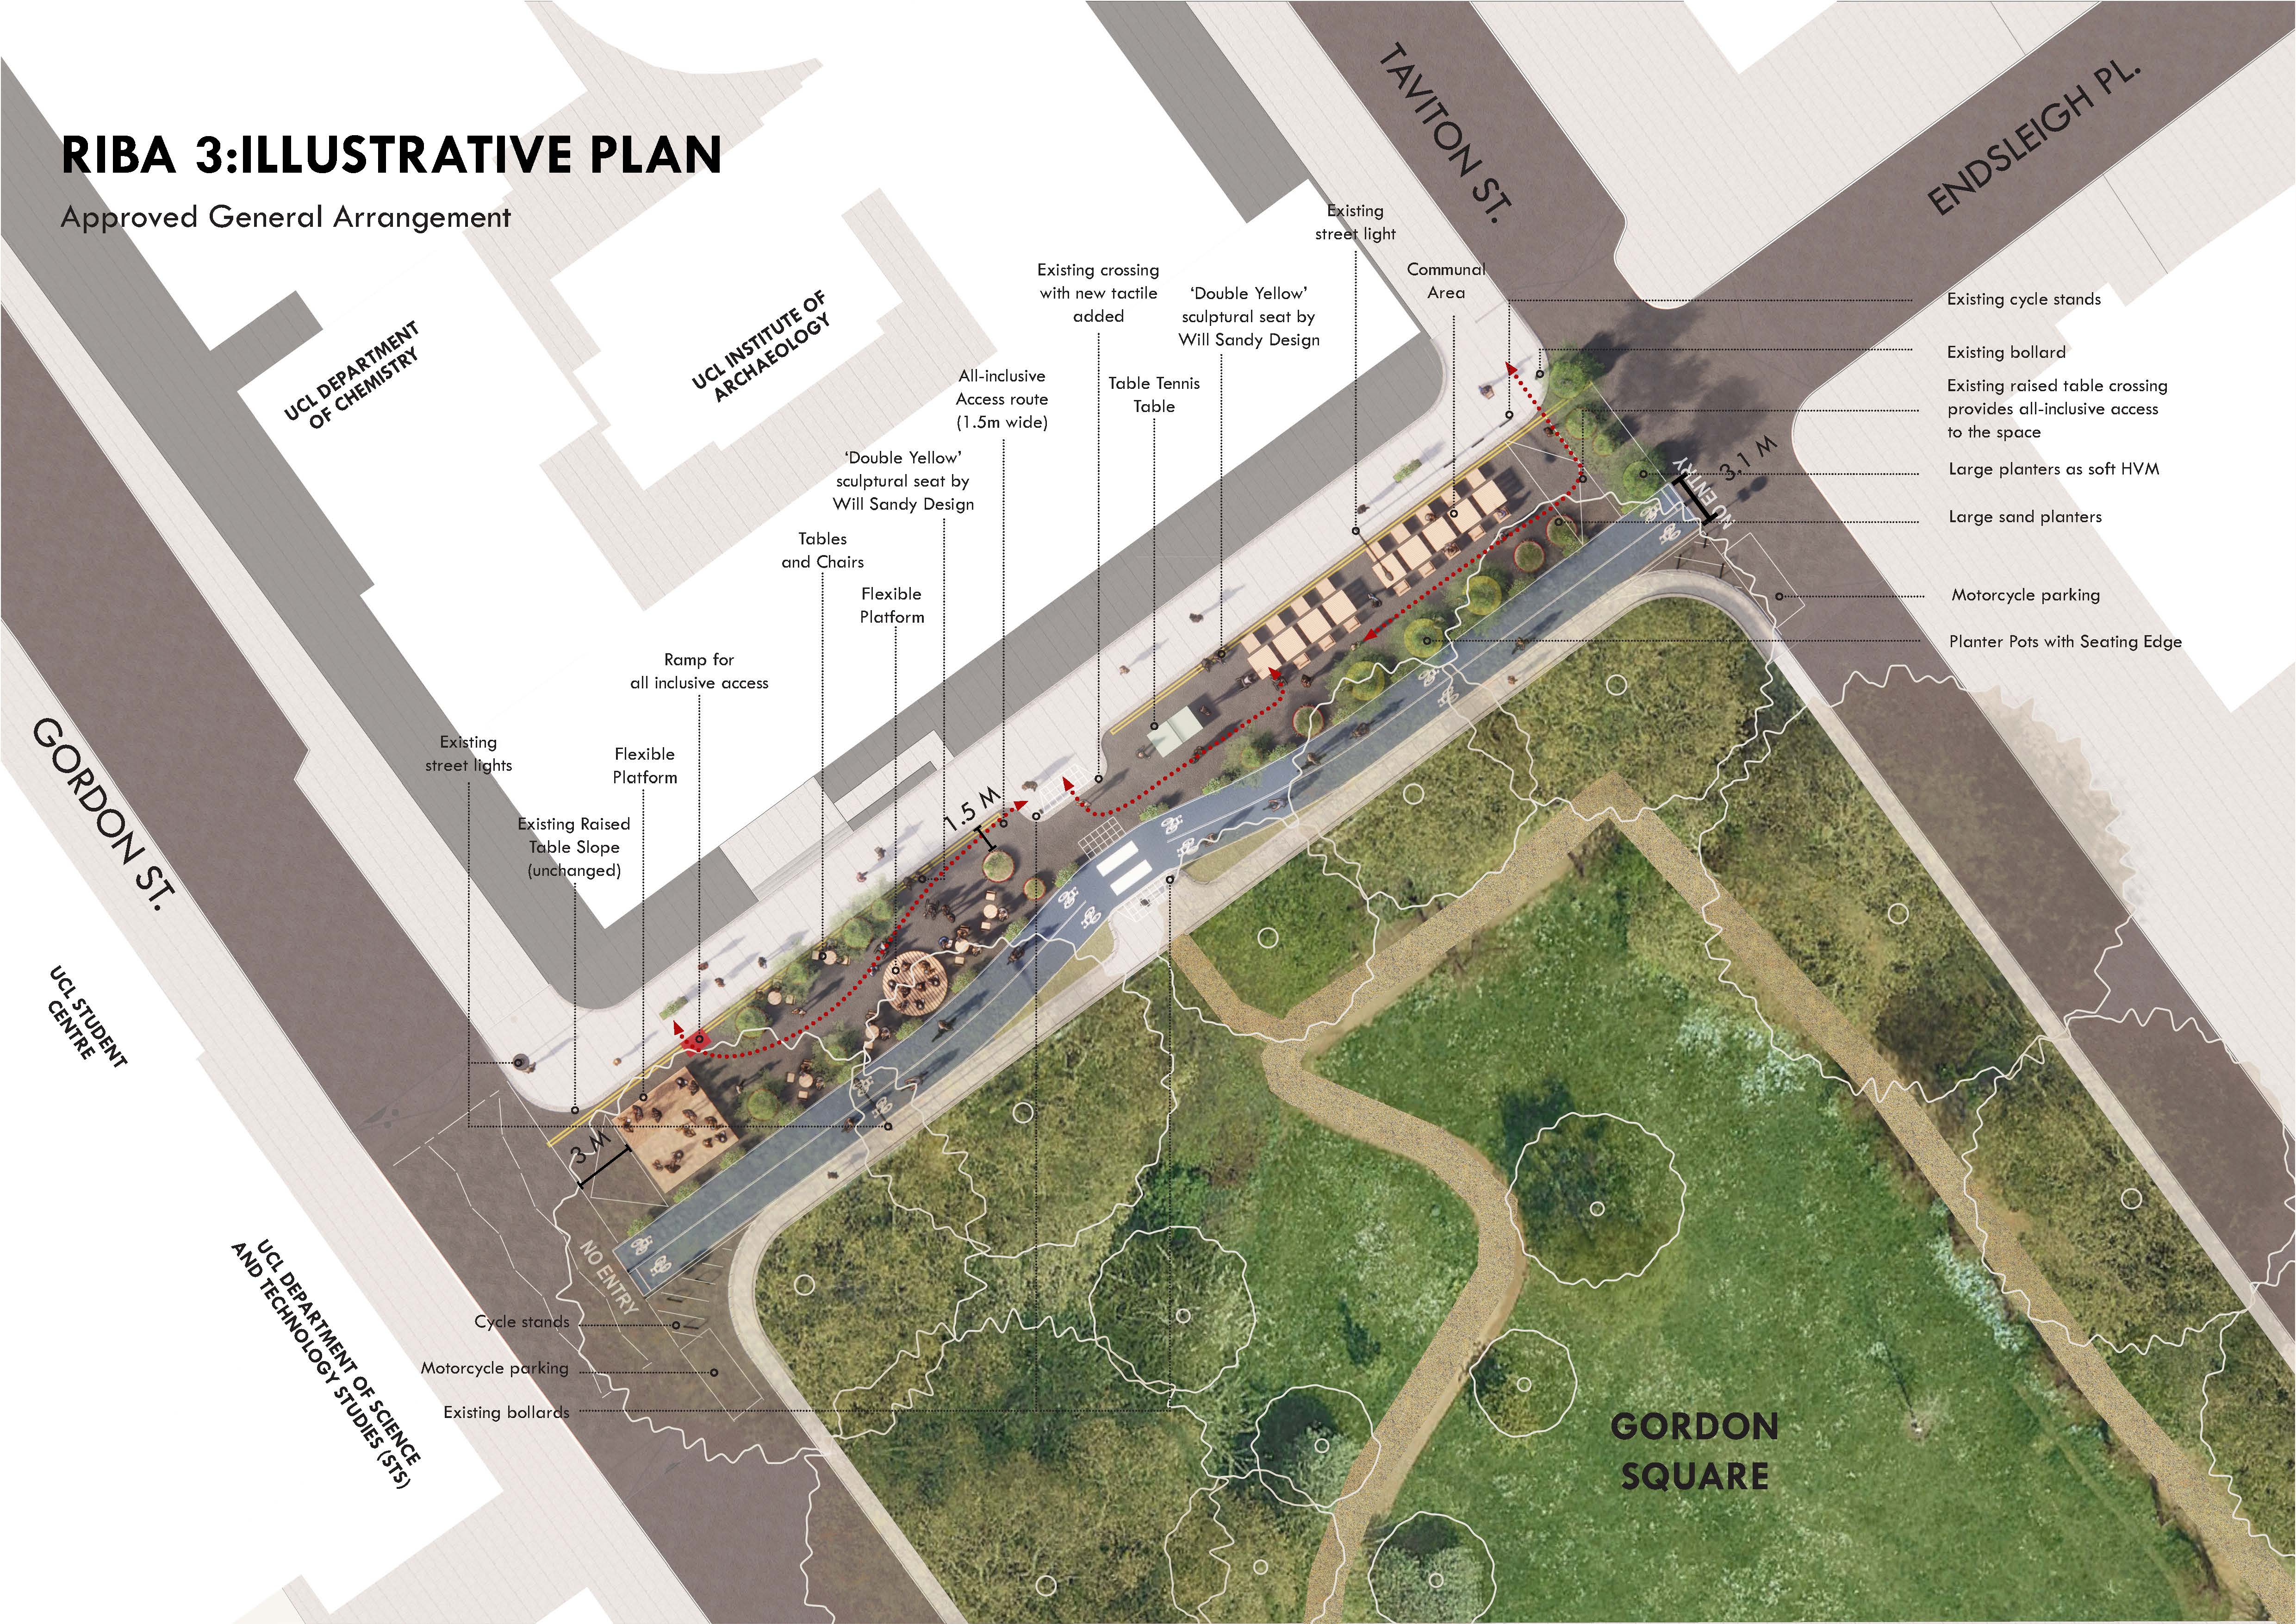 What the proposed changes could look like with a cycle lane, seating and plants